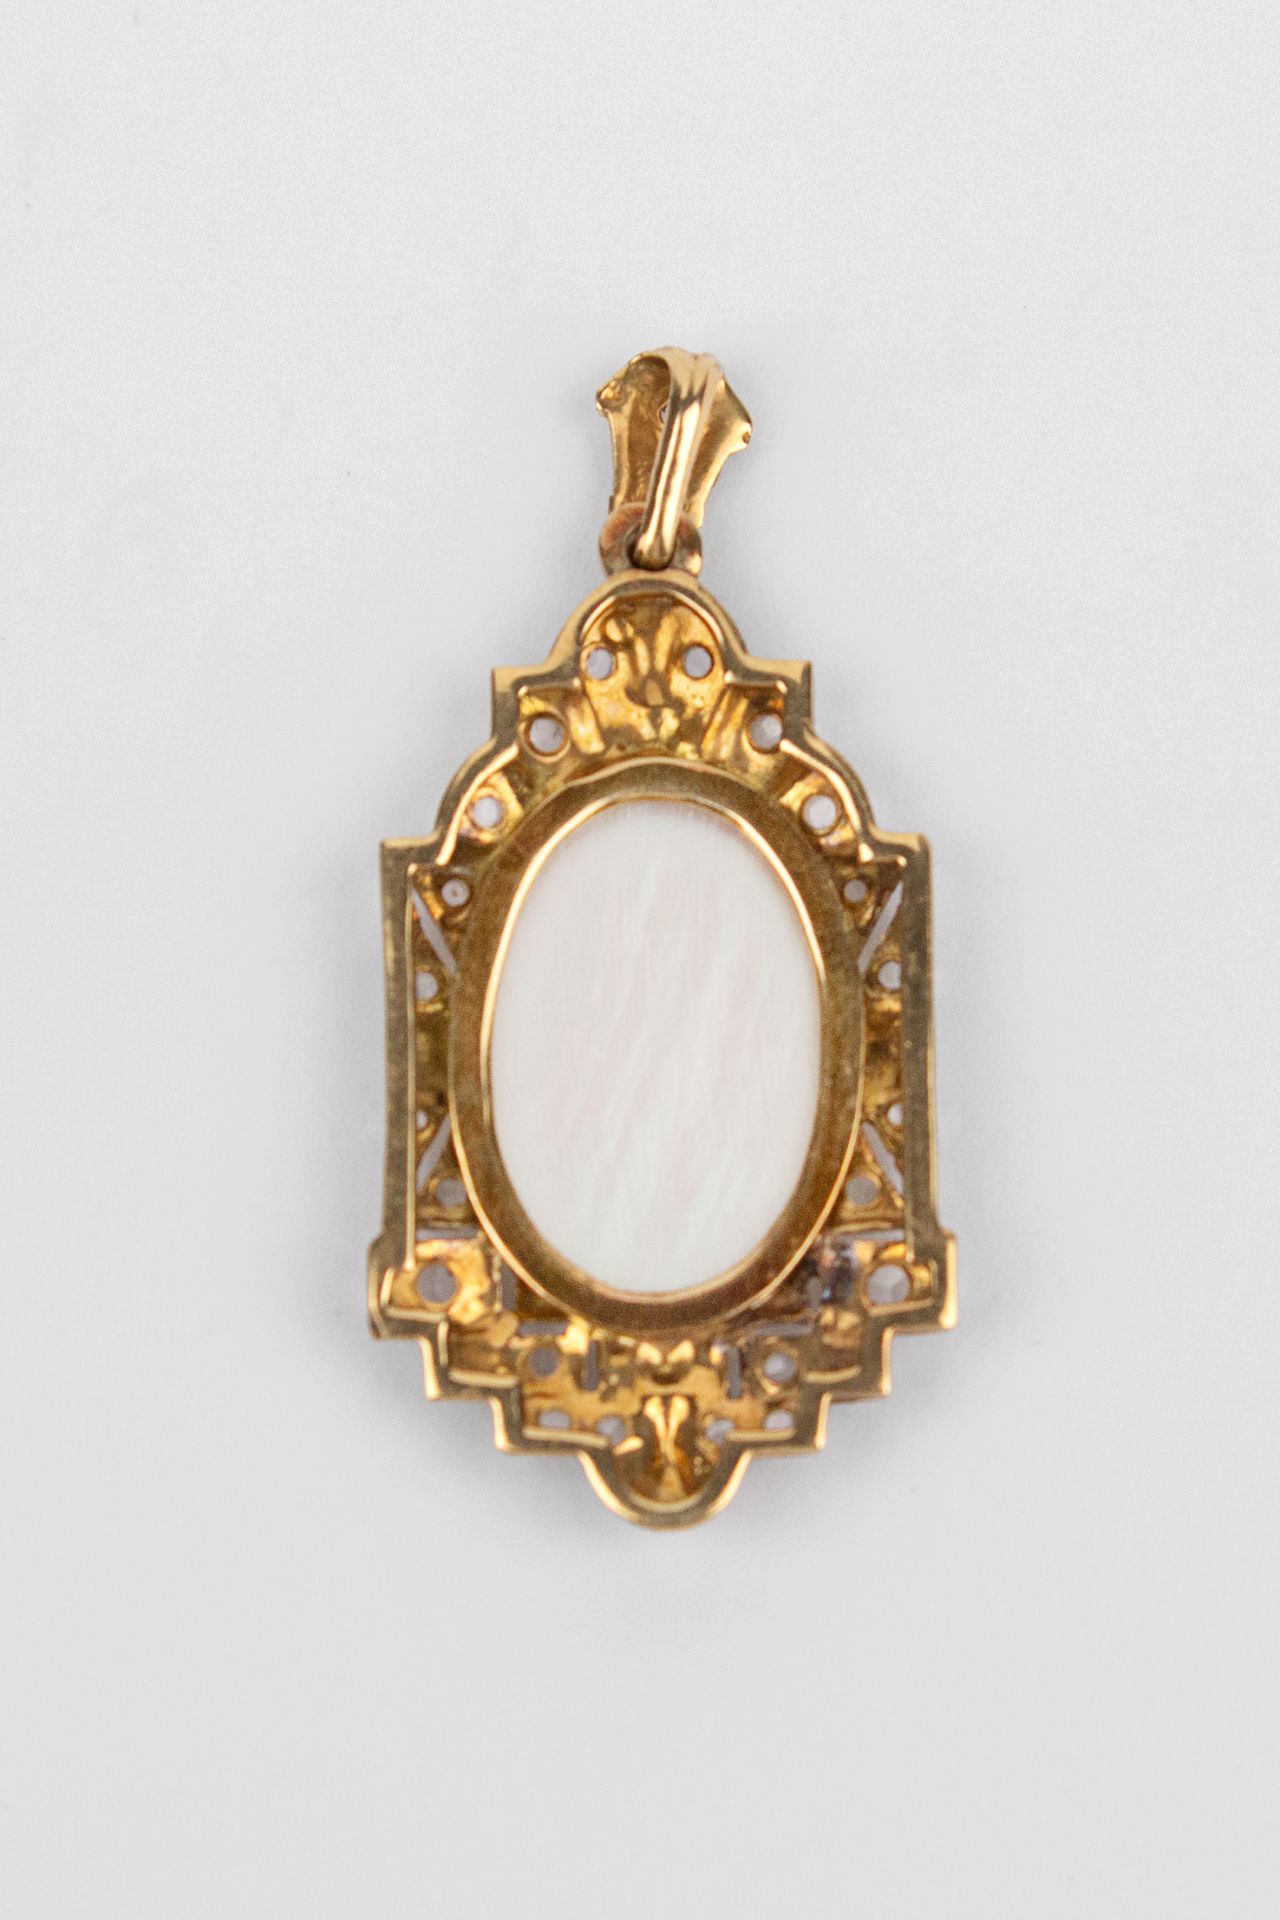 An Art-Déco gold, platinum, diamonds and mother of pearl devotional medal circa 1930 - Image 2 of 2